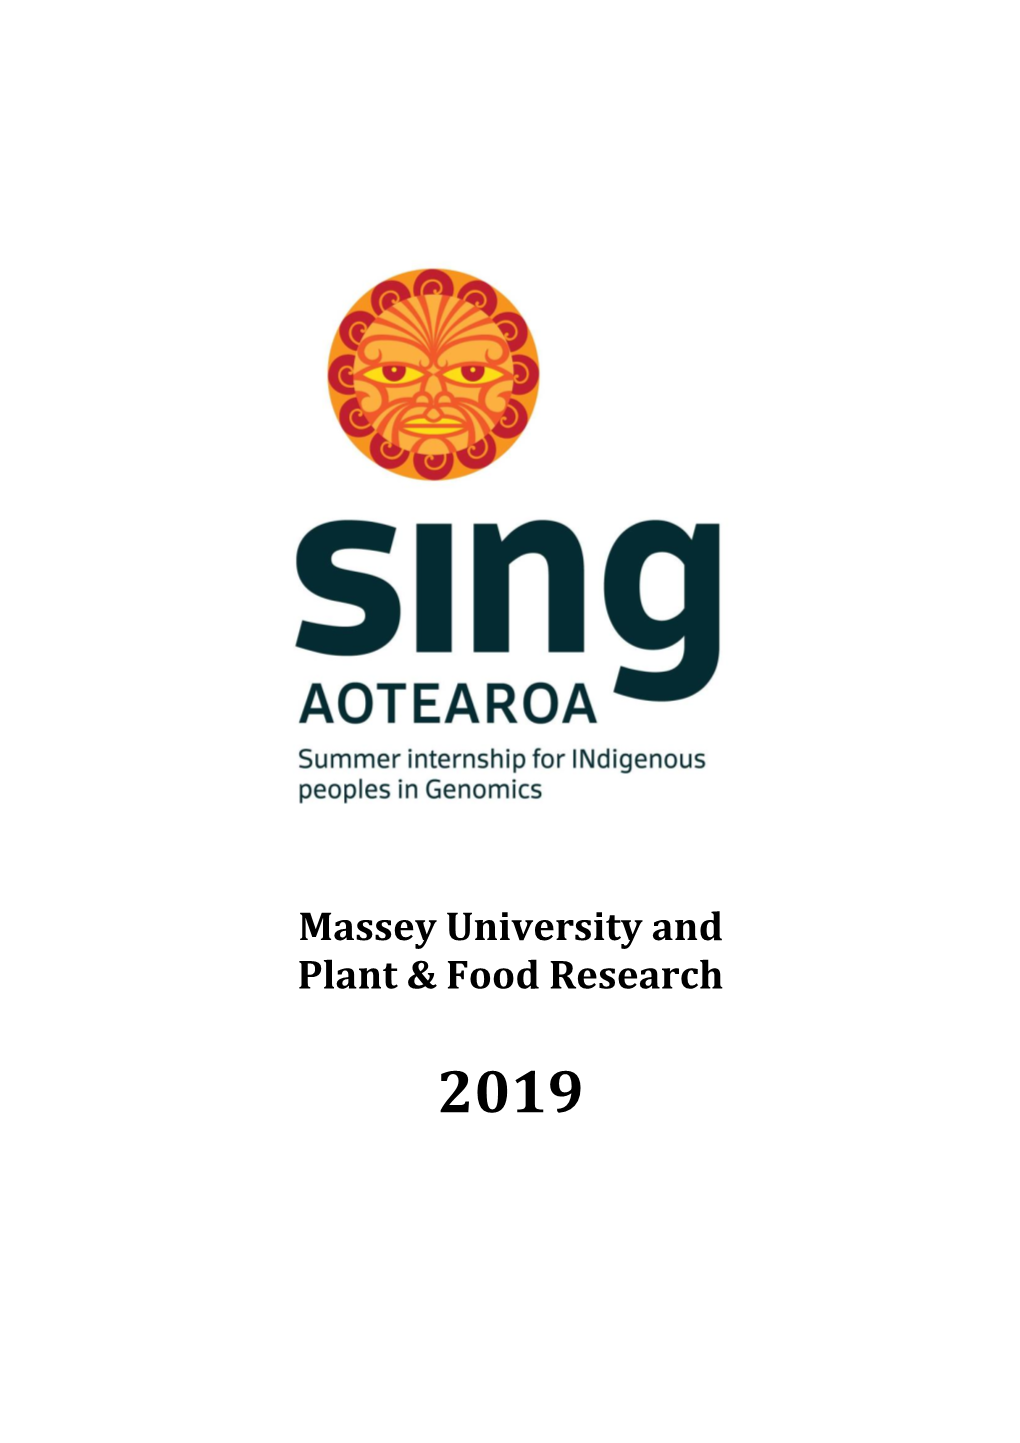 Massey University and Plant & Food Research